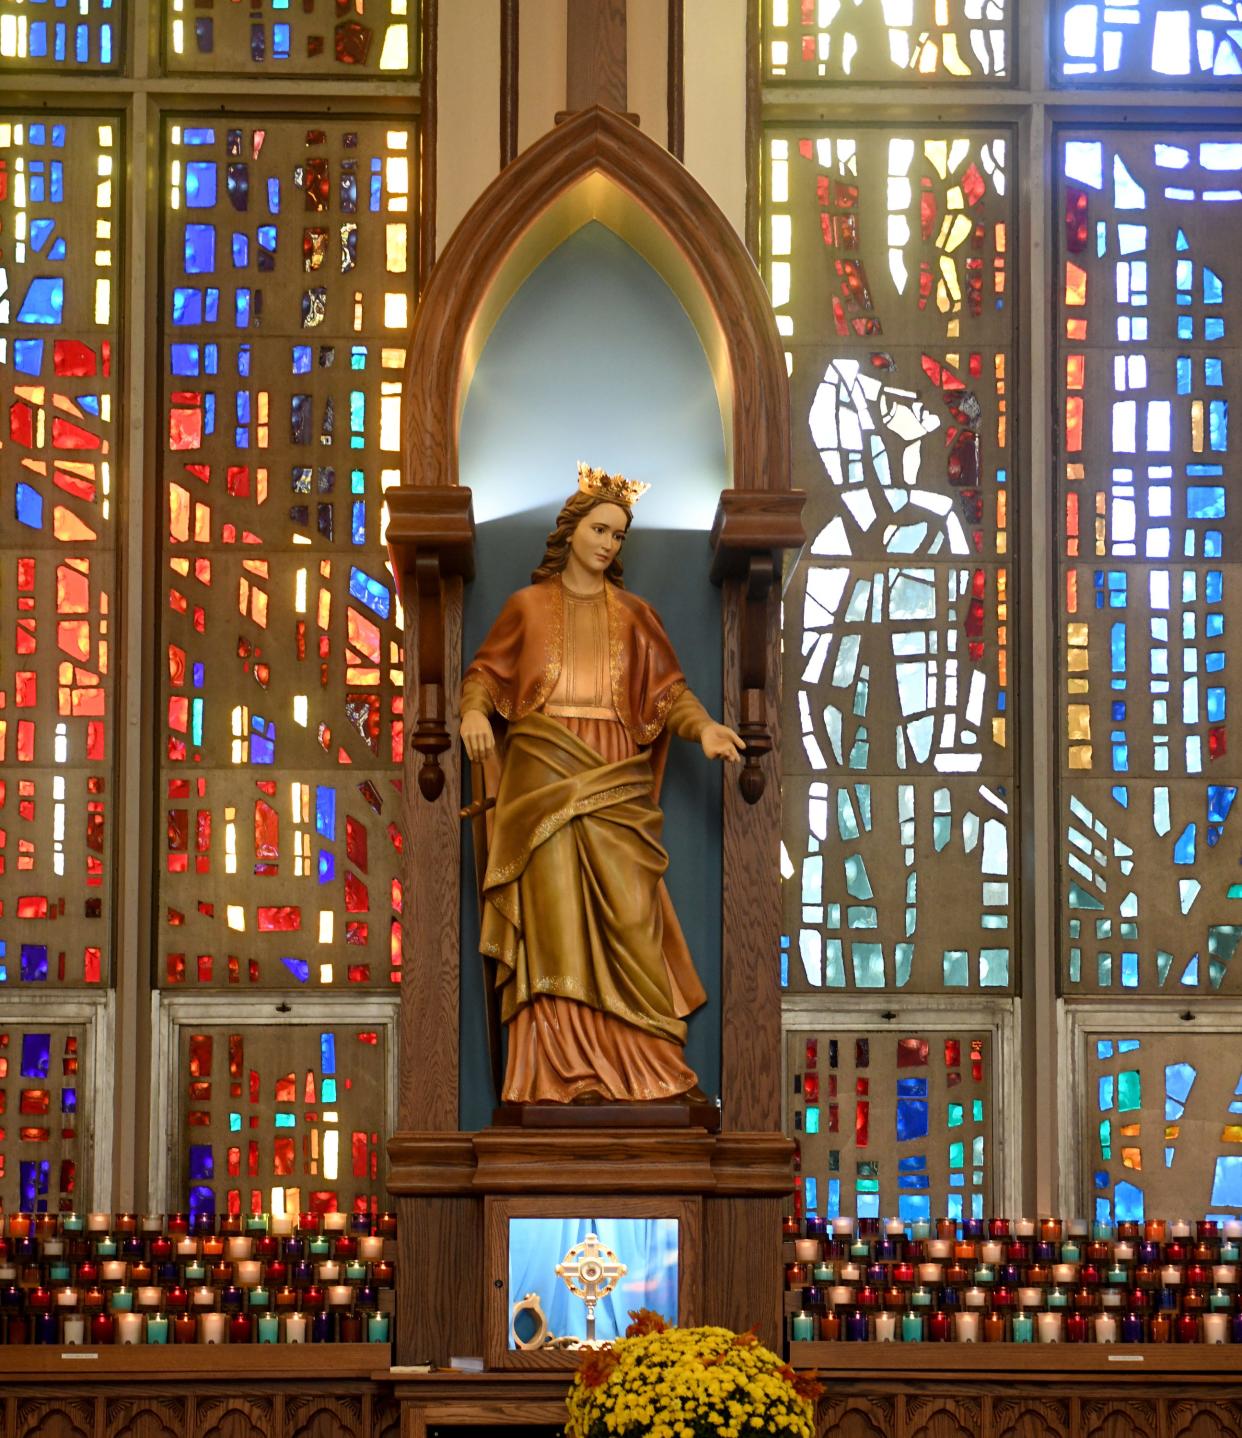 Divine Mercy/St. Mary’s Catholic Church is celebrating the Massillon-based National Shrine of St. Dymphna's 85th anniversary.